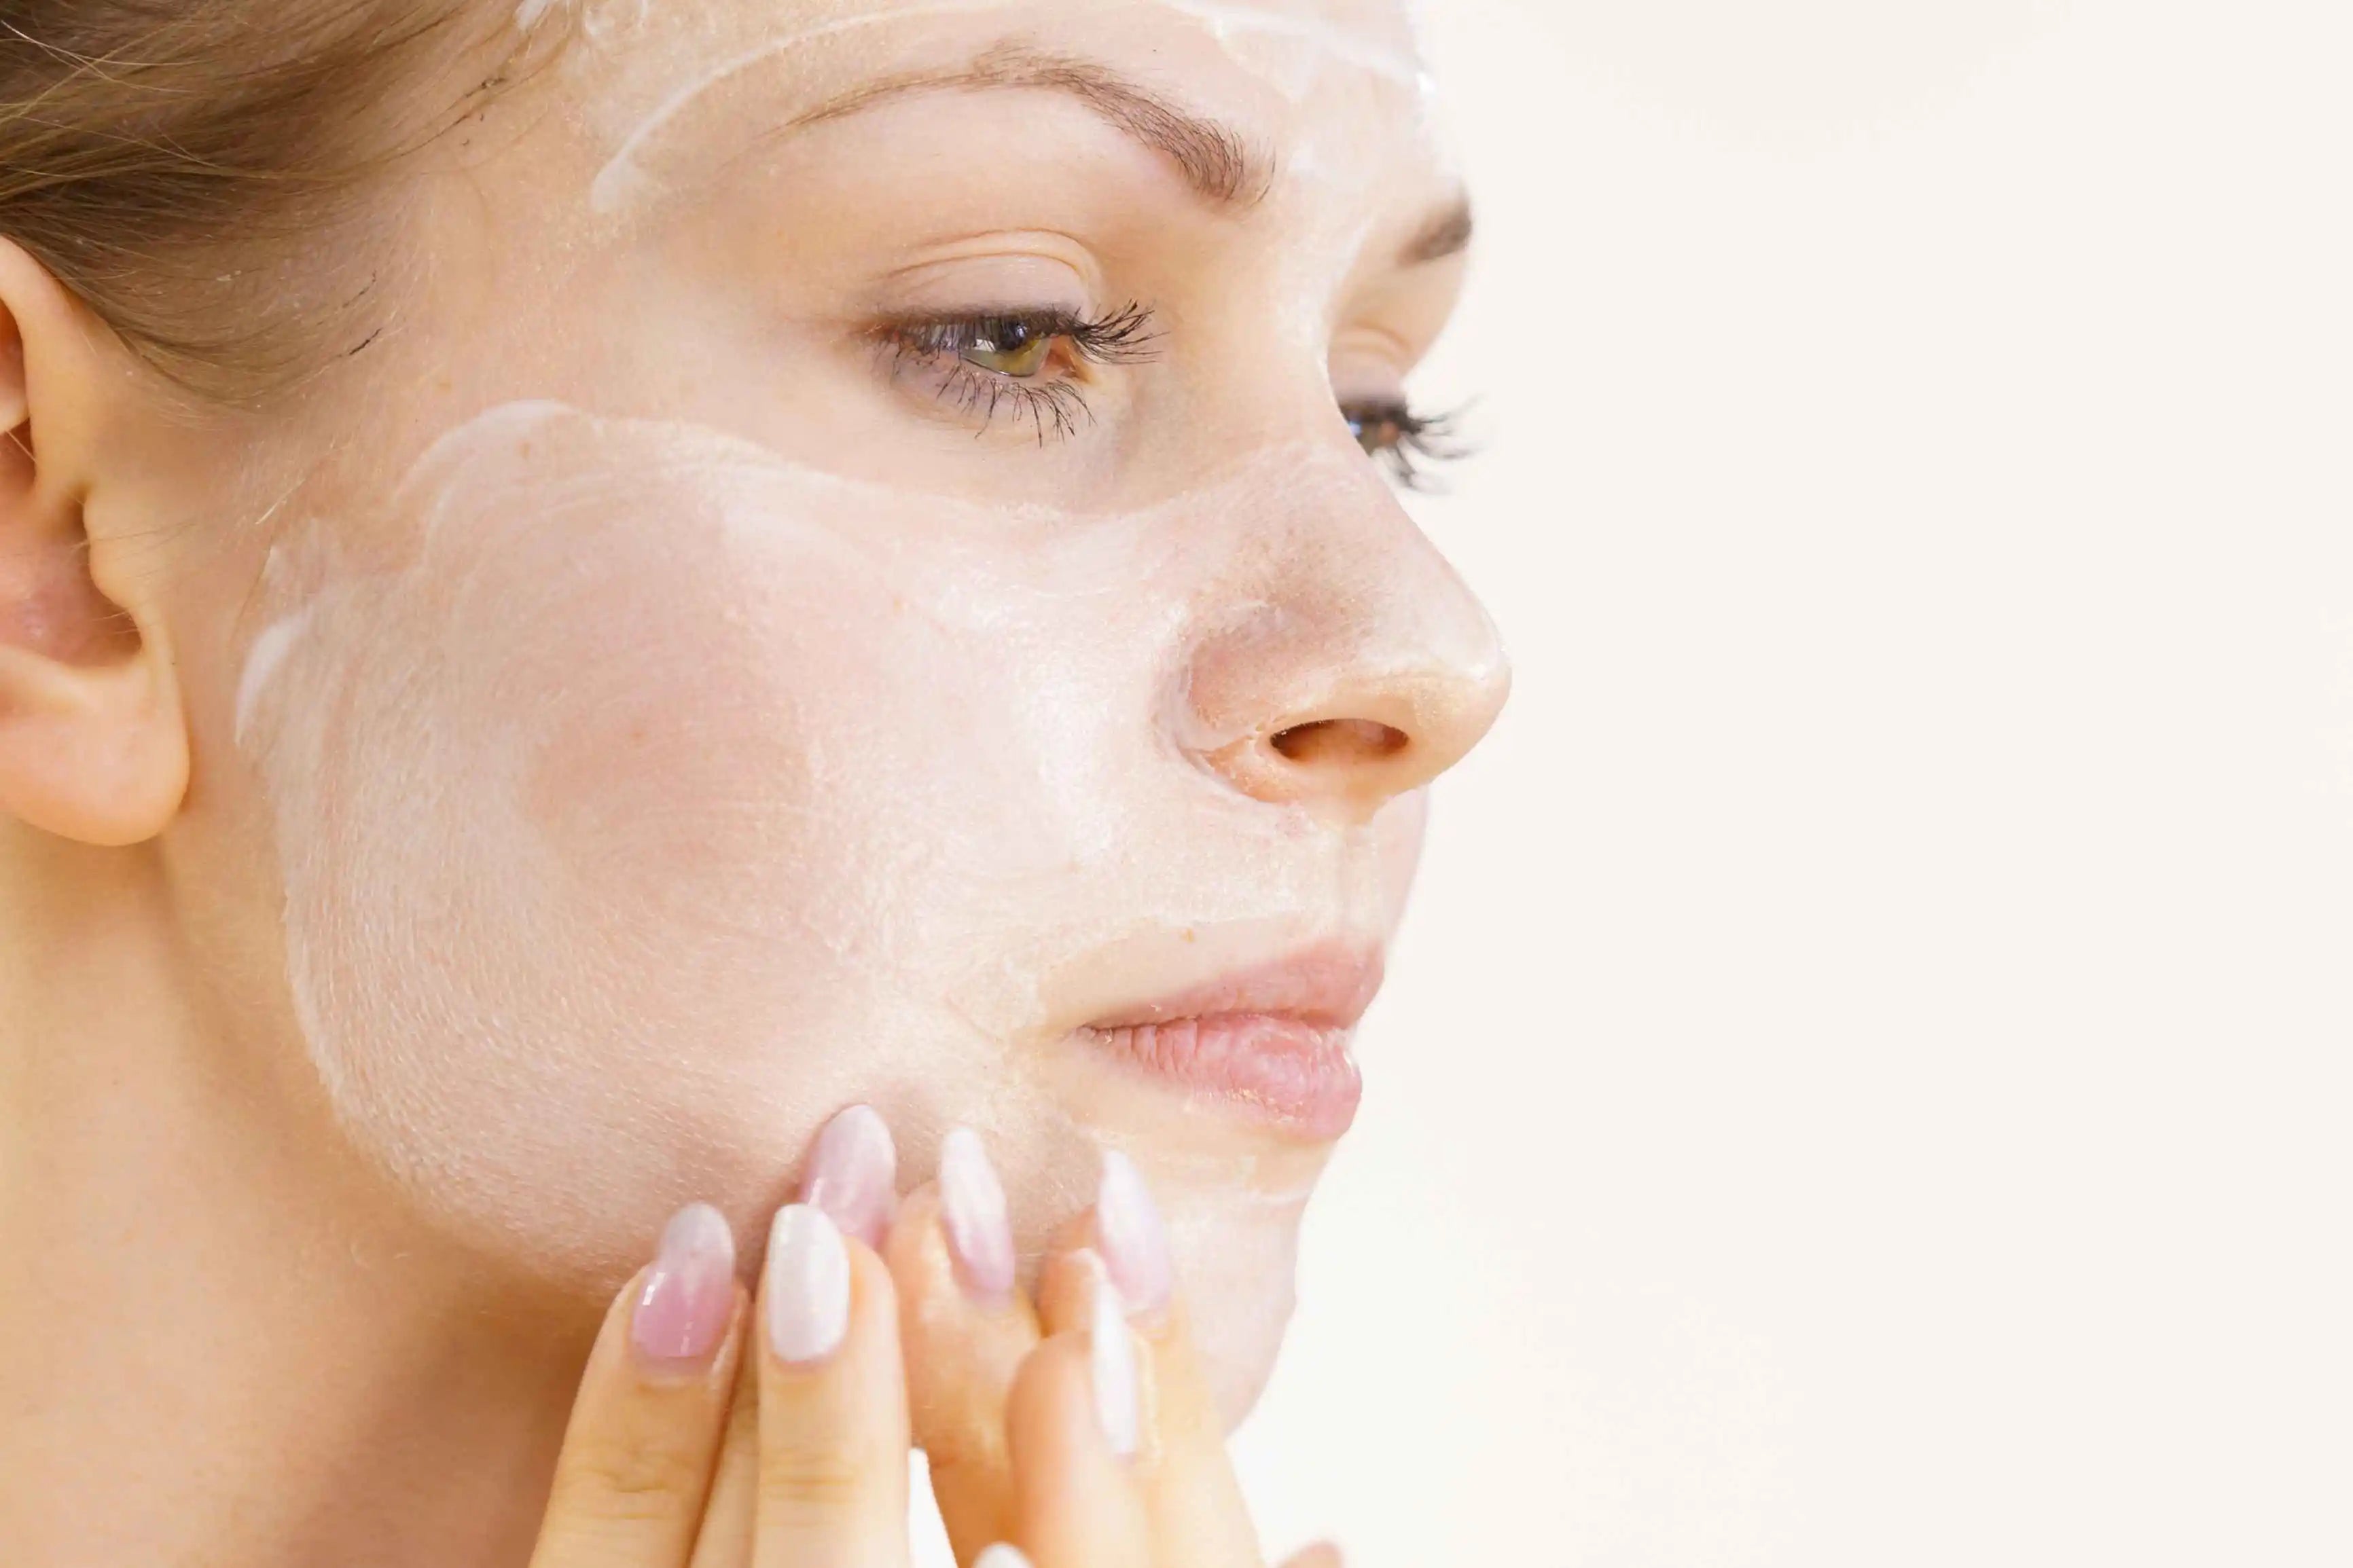 What Does Moisturiser Do for Your Face?